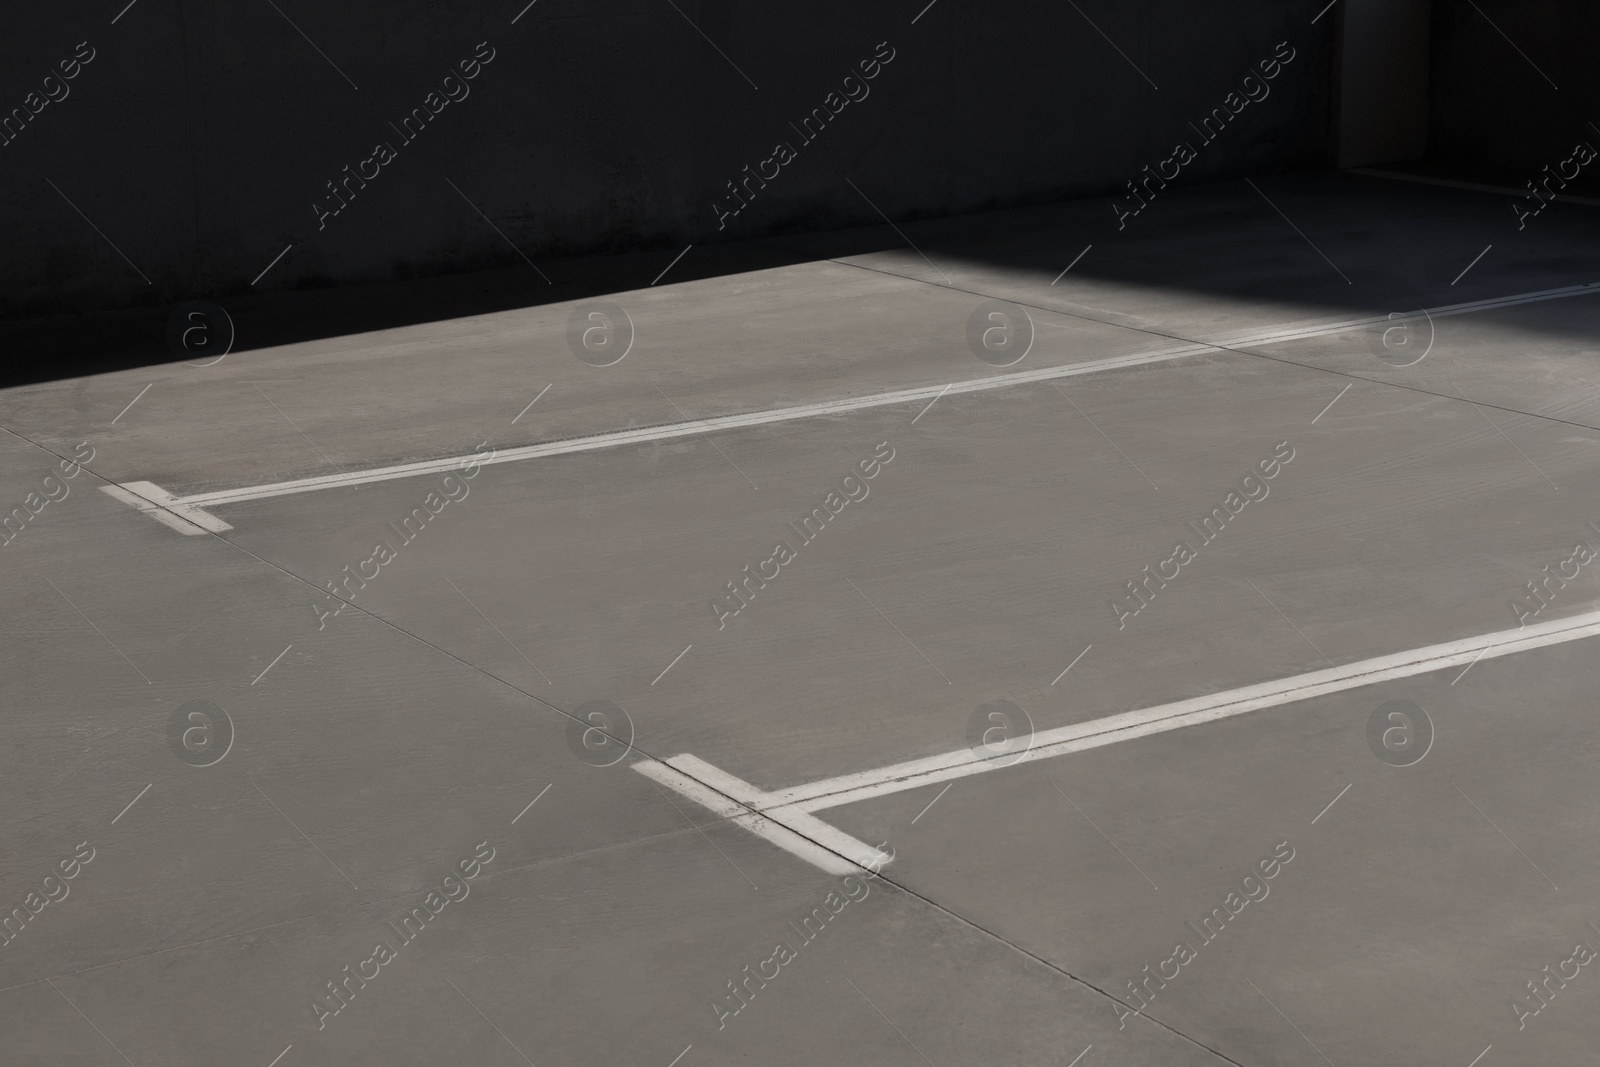 Photo of Outdoor car parking lot with white marking lines